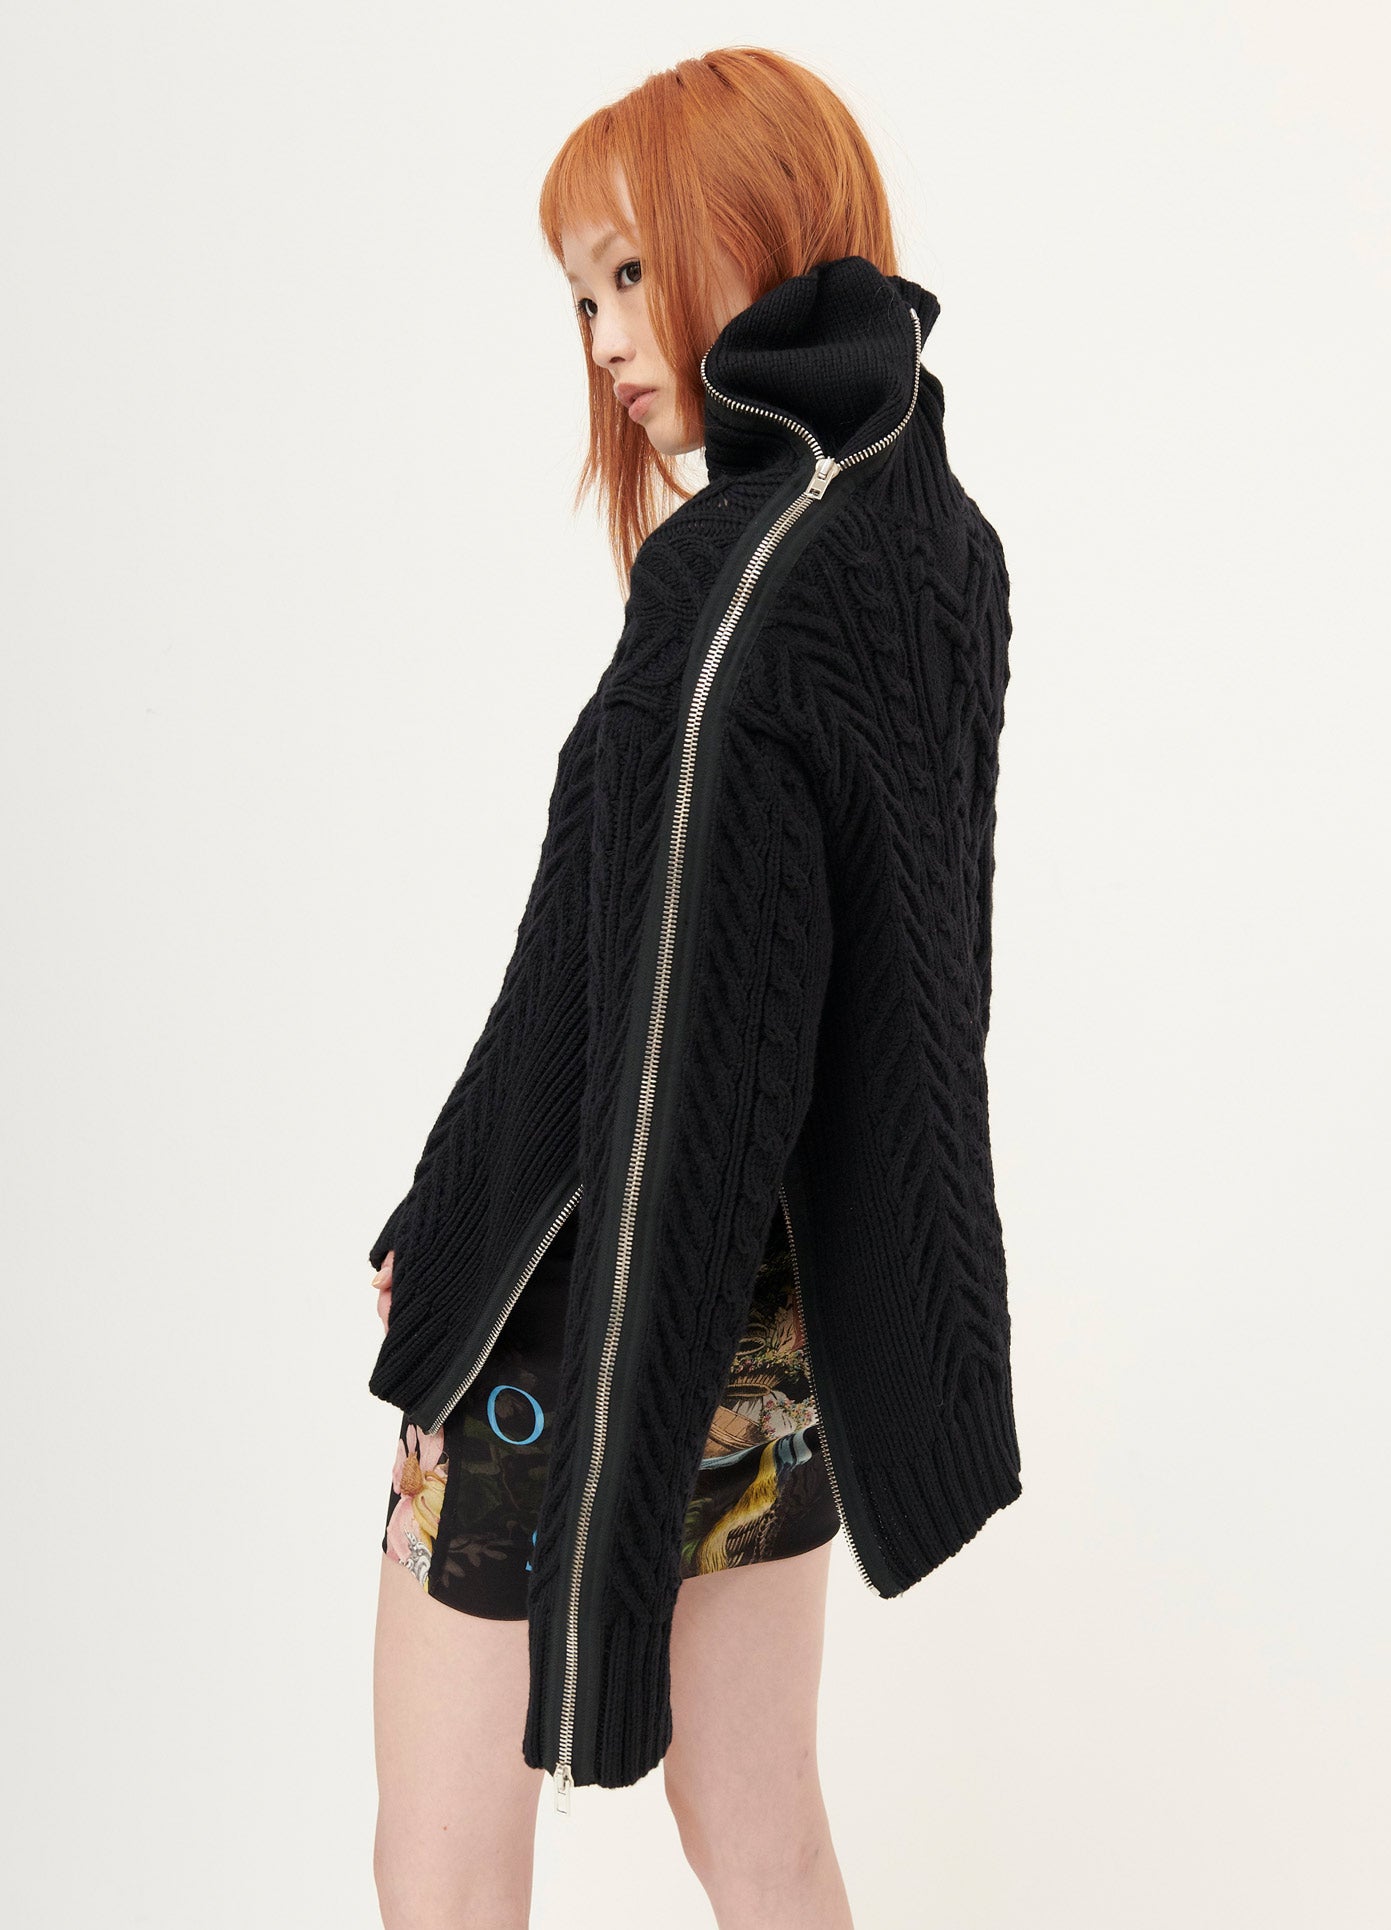 MONSE Turtleneck Zipper Detail Cable Sweater in Black on Model Looking Left Back View